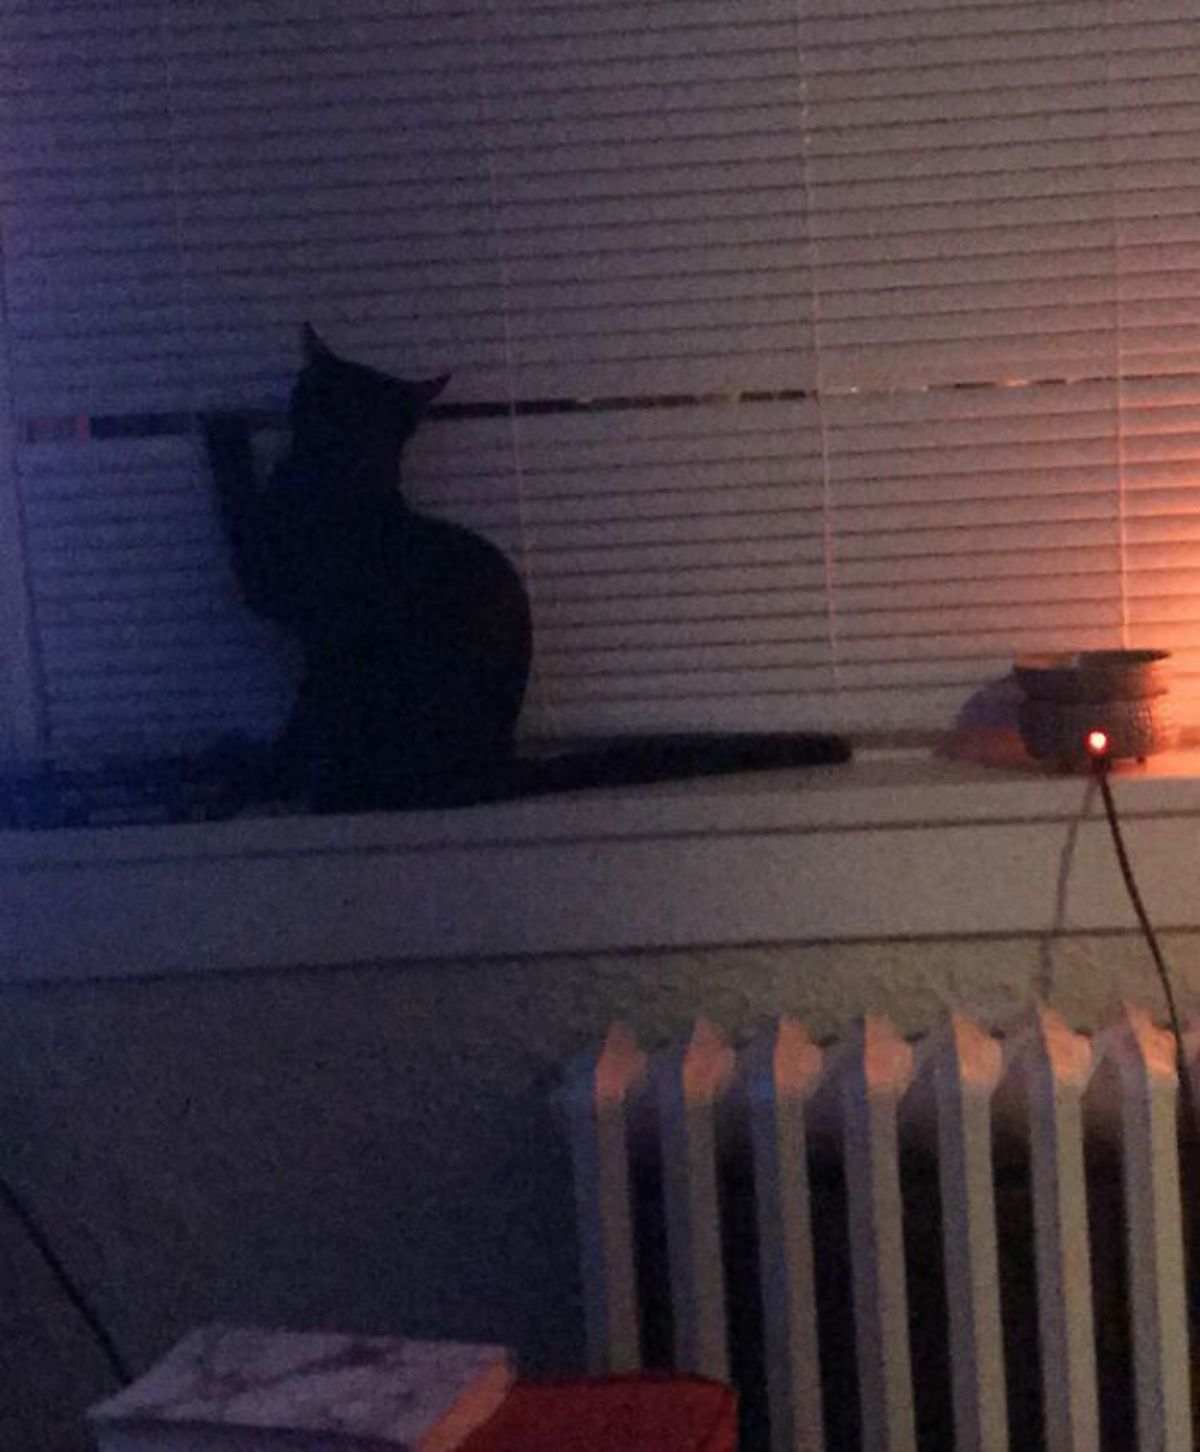 black cat sitting on a window ledge and looking out of a gap in the blinds